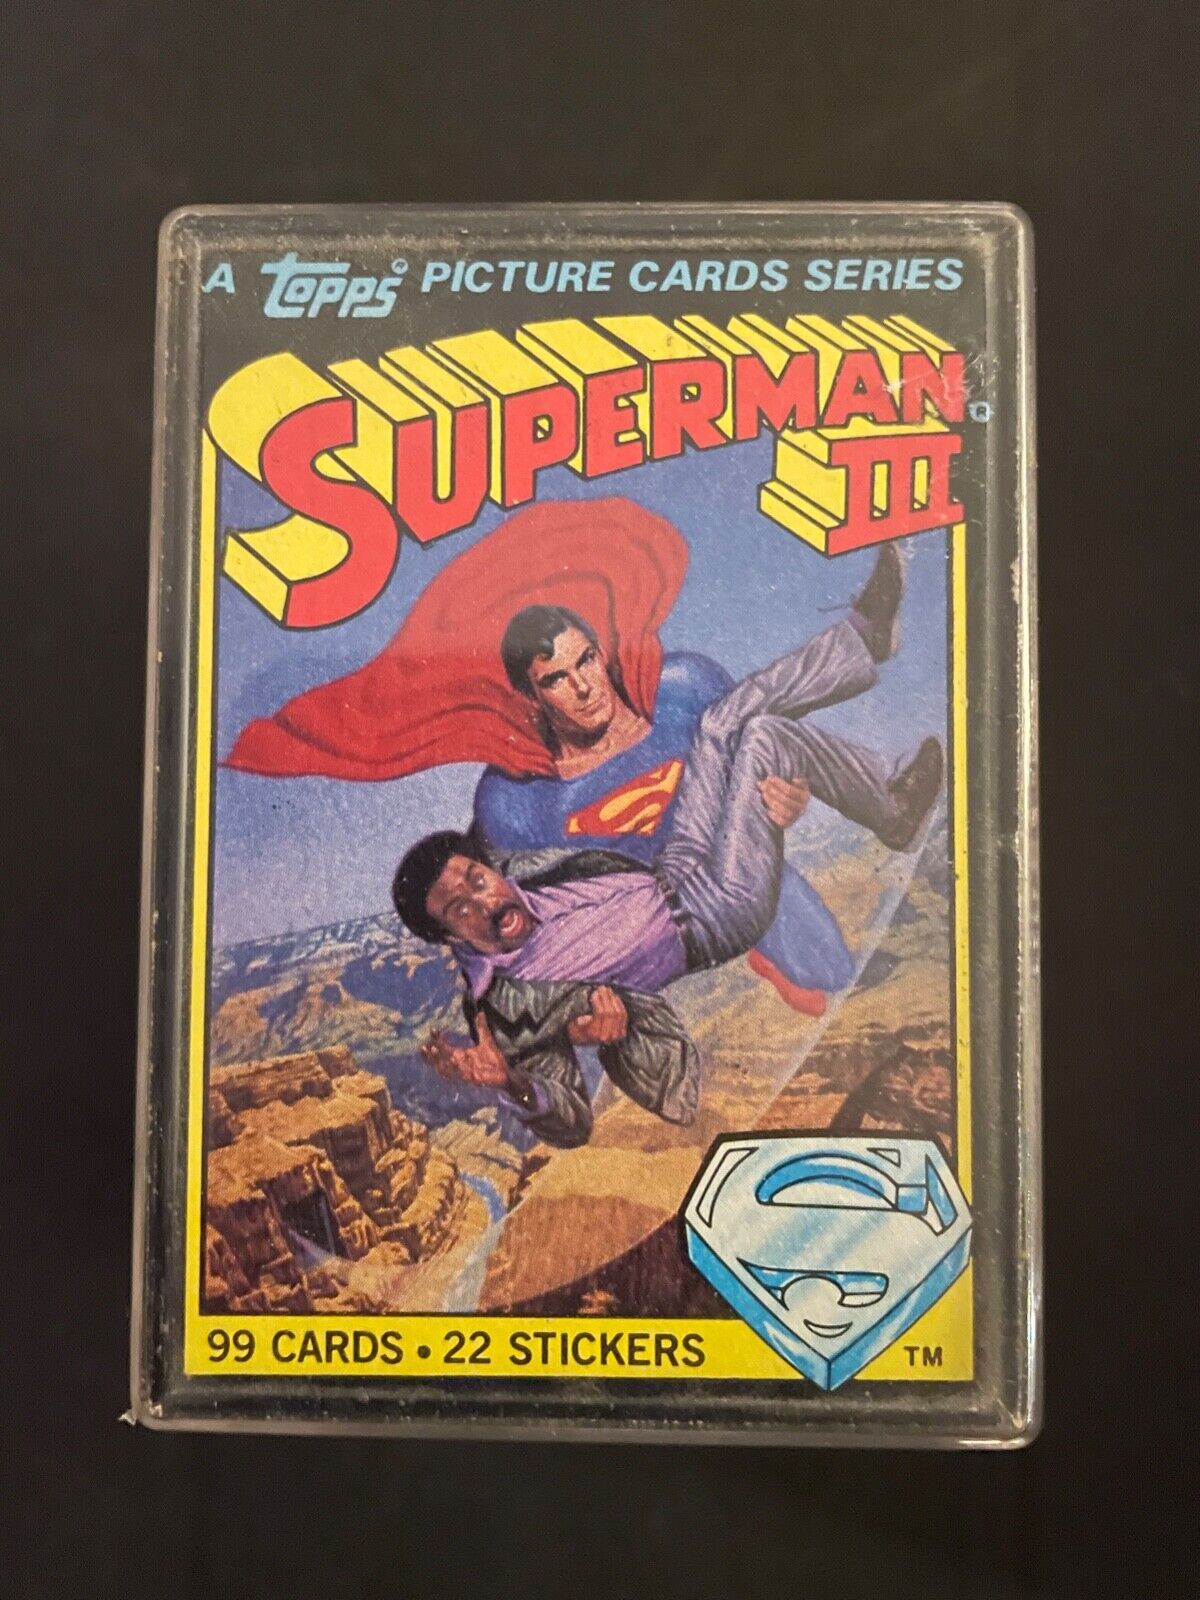 Superman III Complete Topps Picture Card Set with Stickers ST3-4